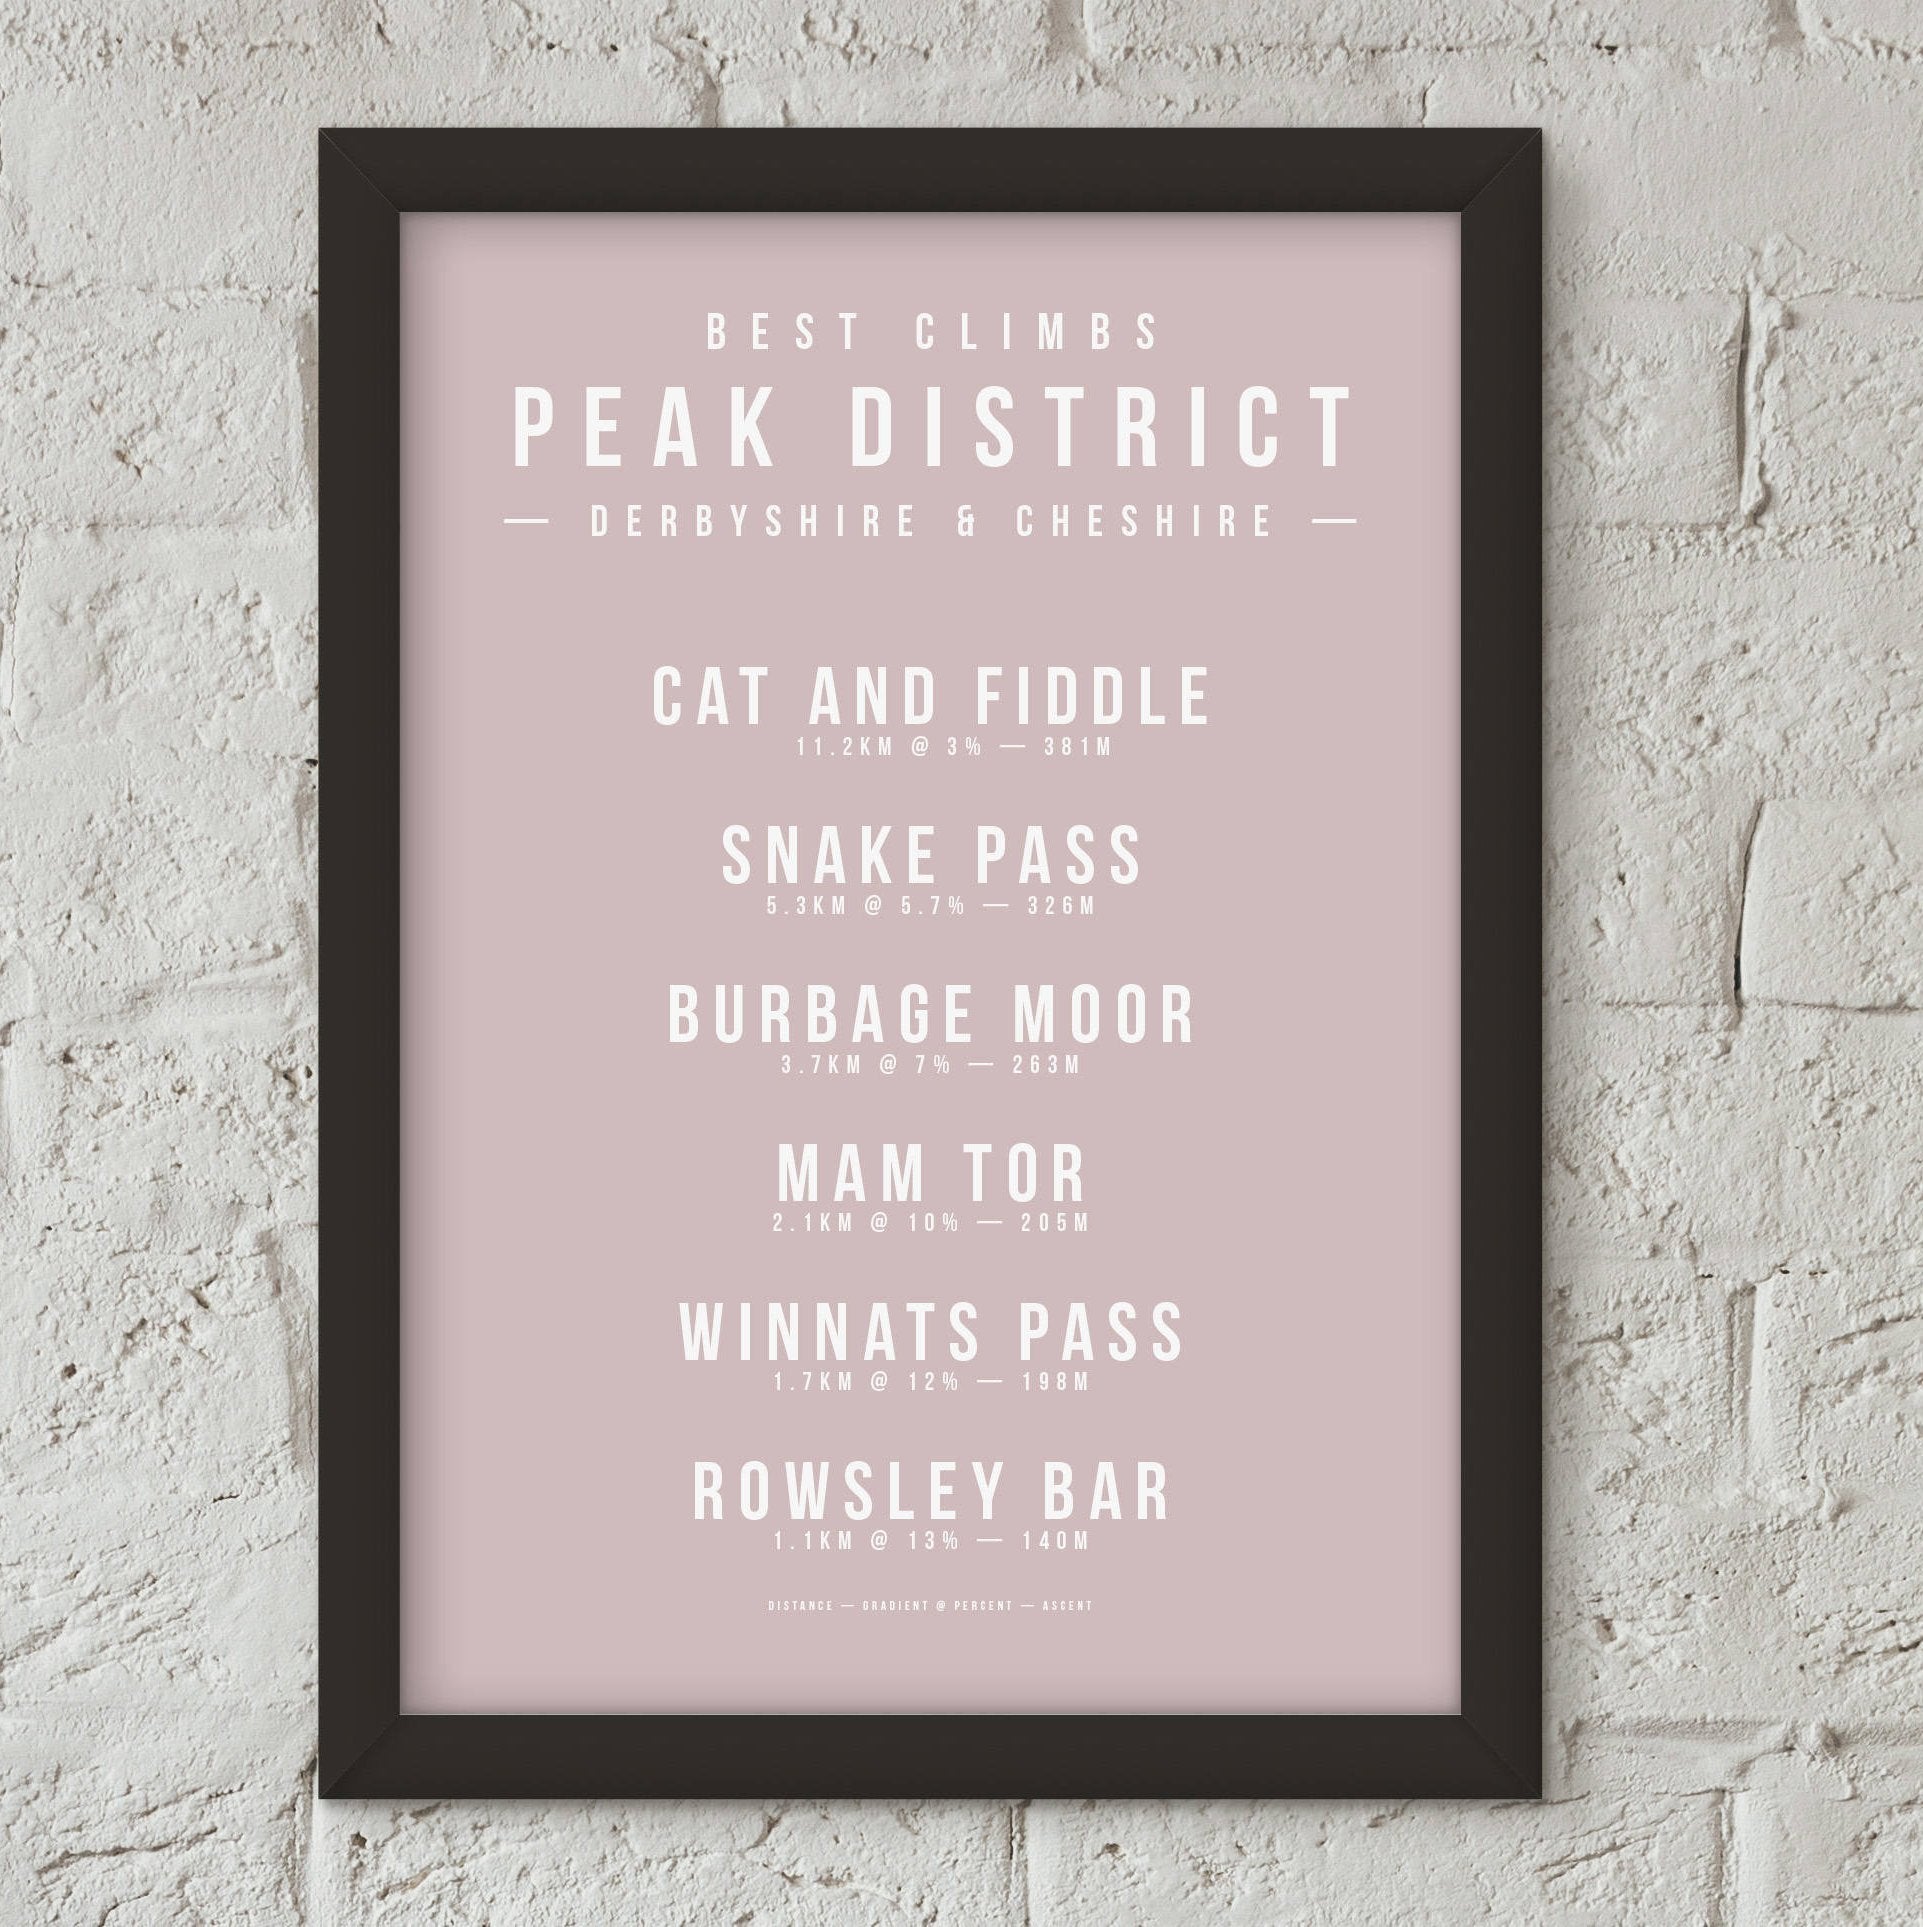 Climbs of the Peak District, Derbyshire & Cheshire – Poster – The English Cyclist